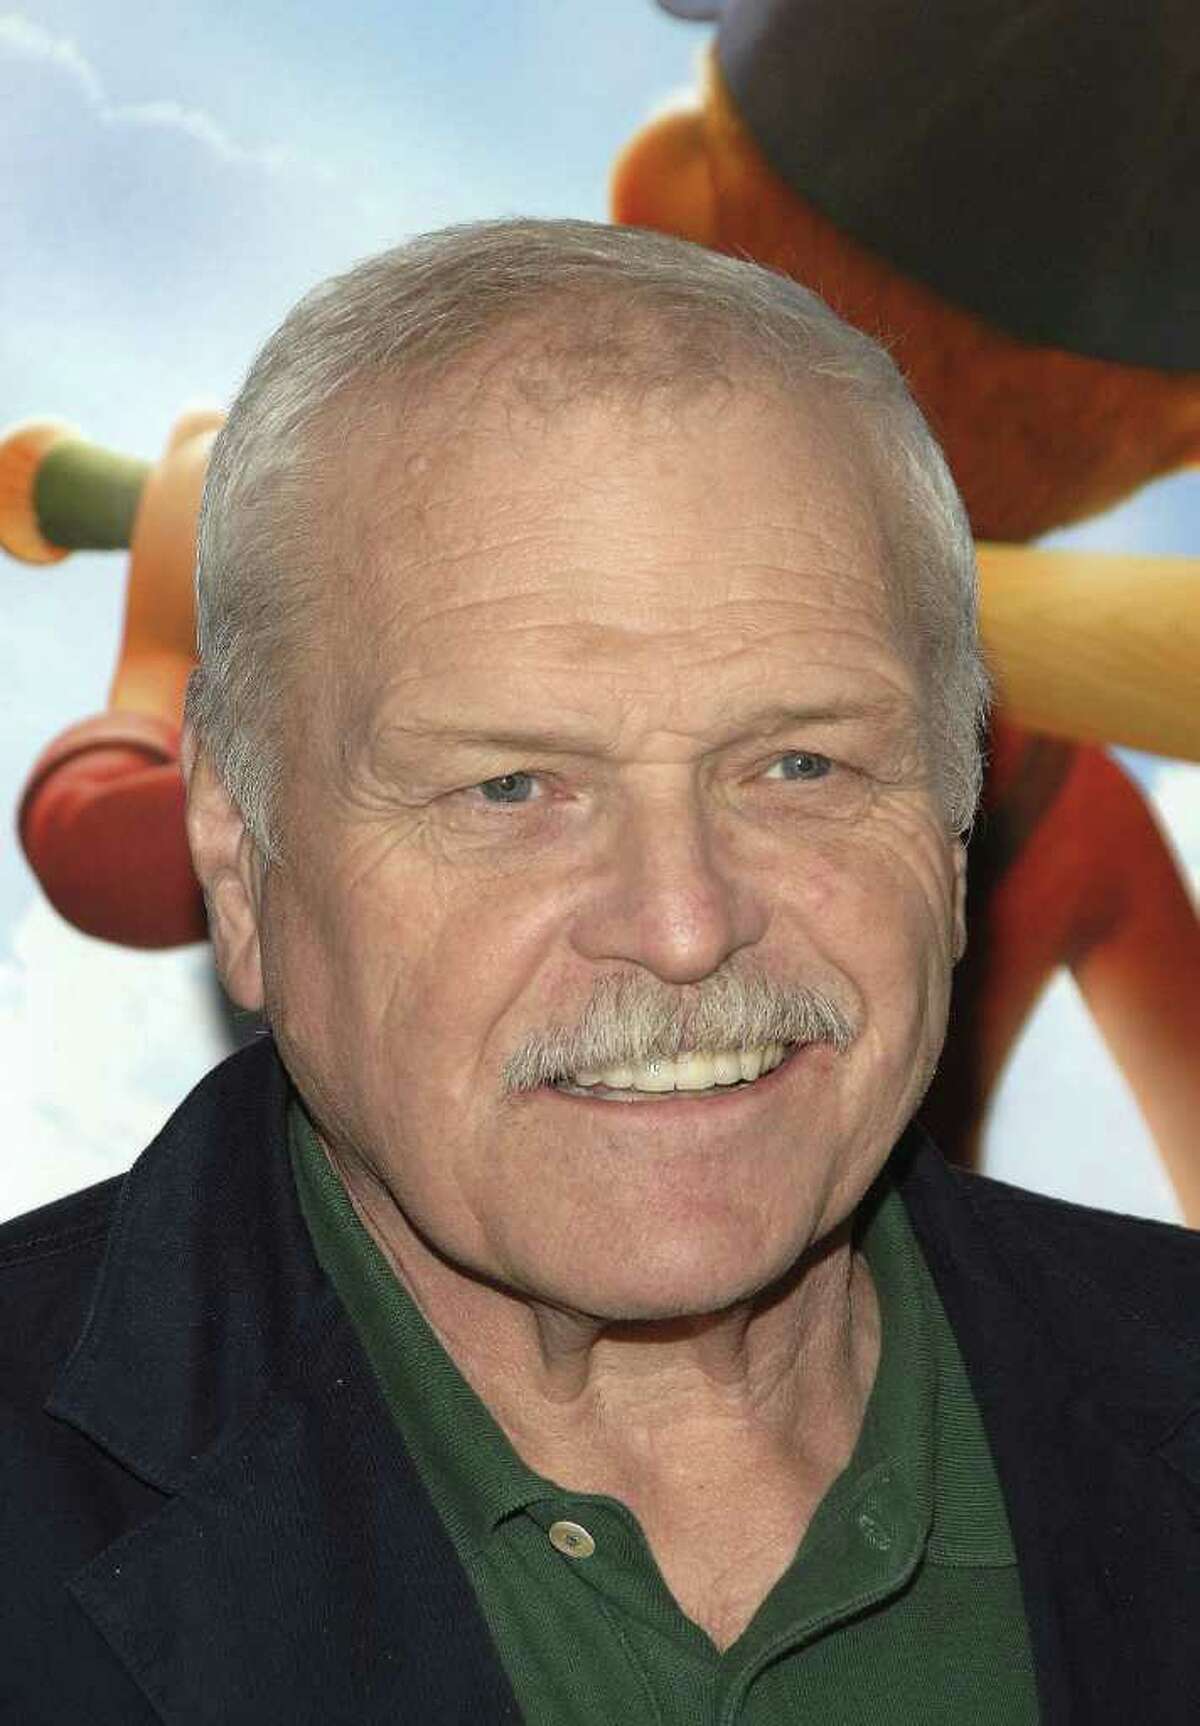 Bridgeport native and Litchfield County resident Brian Dennehy is teaming up with Nathan Lane for a new production of "The Iceman Cometh" in Chicago next spring.